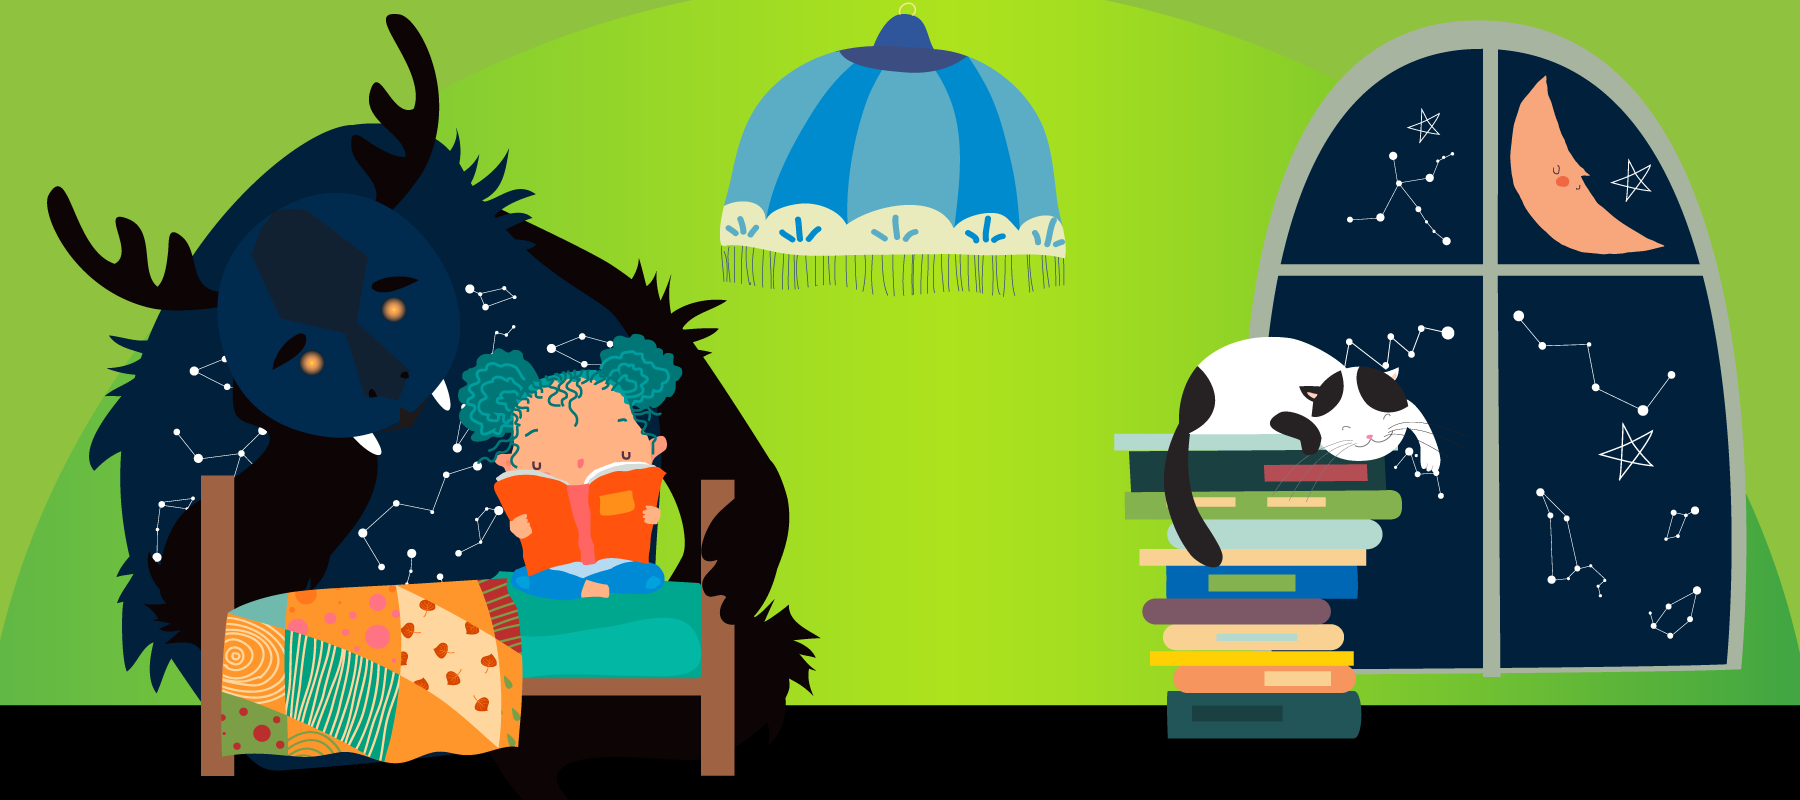 Illustration: on a green background, little girl reads to a monster at the foot of her bed, while a cat naps by the window on a stack of books